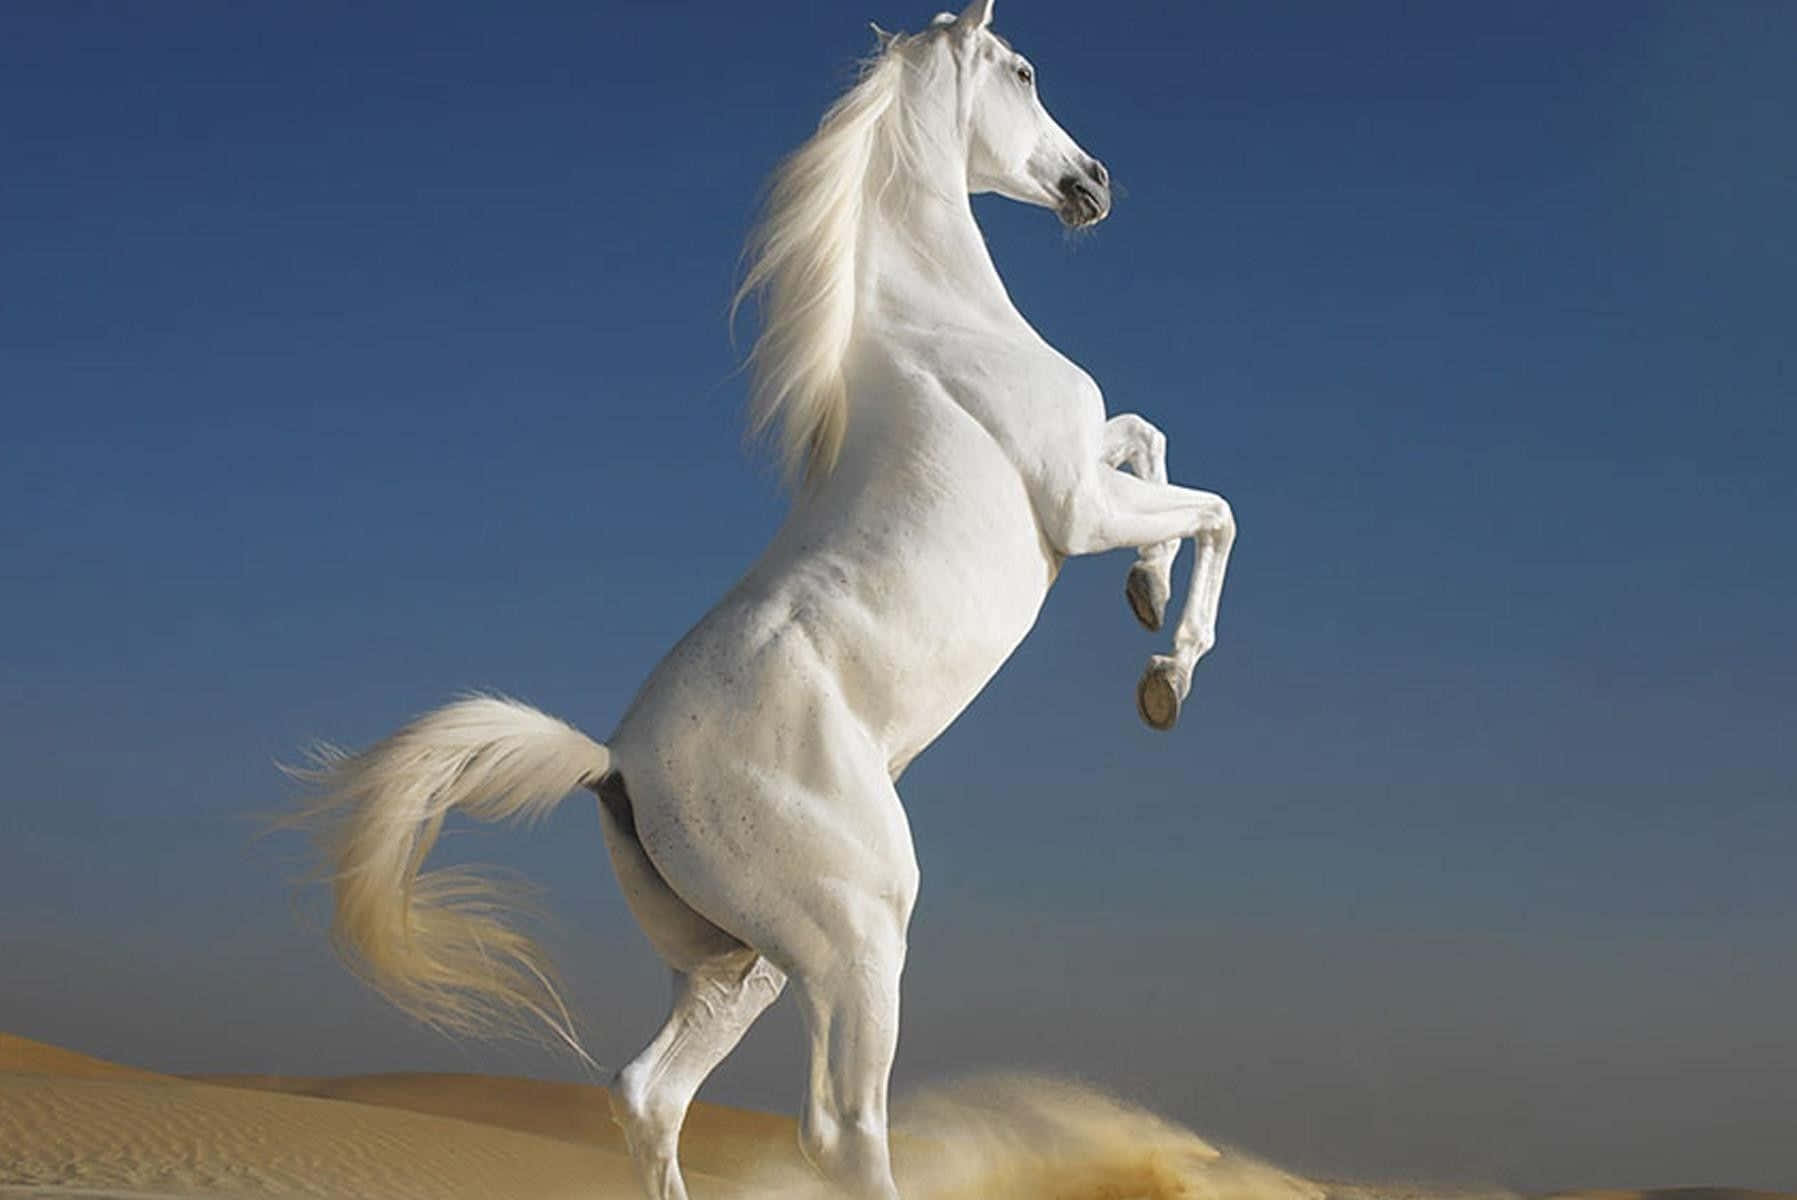 A white horse stands majestically in the countryside.